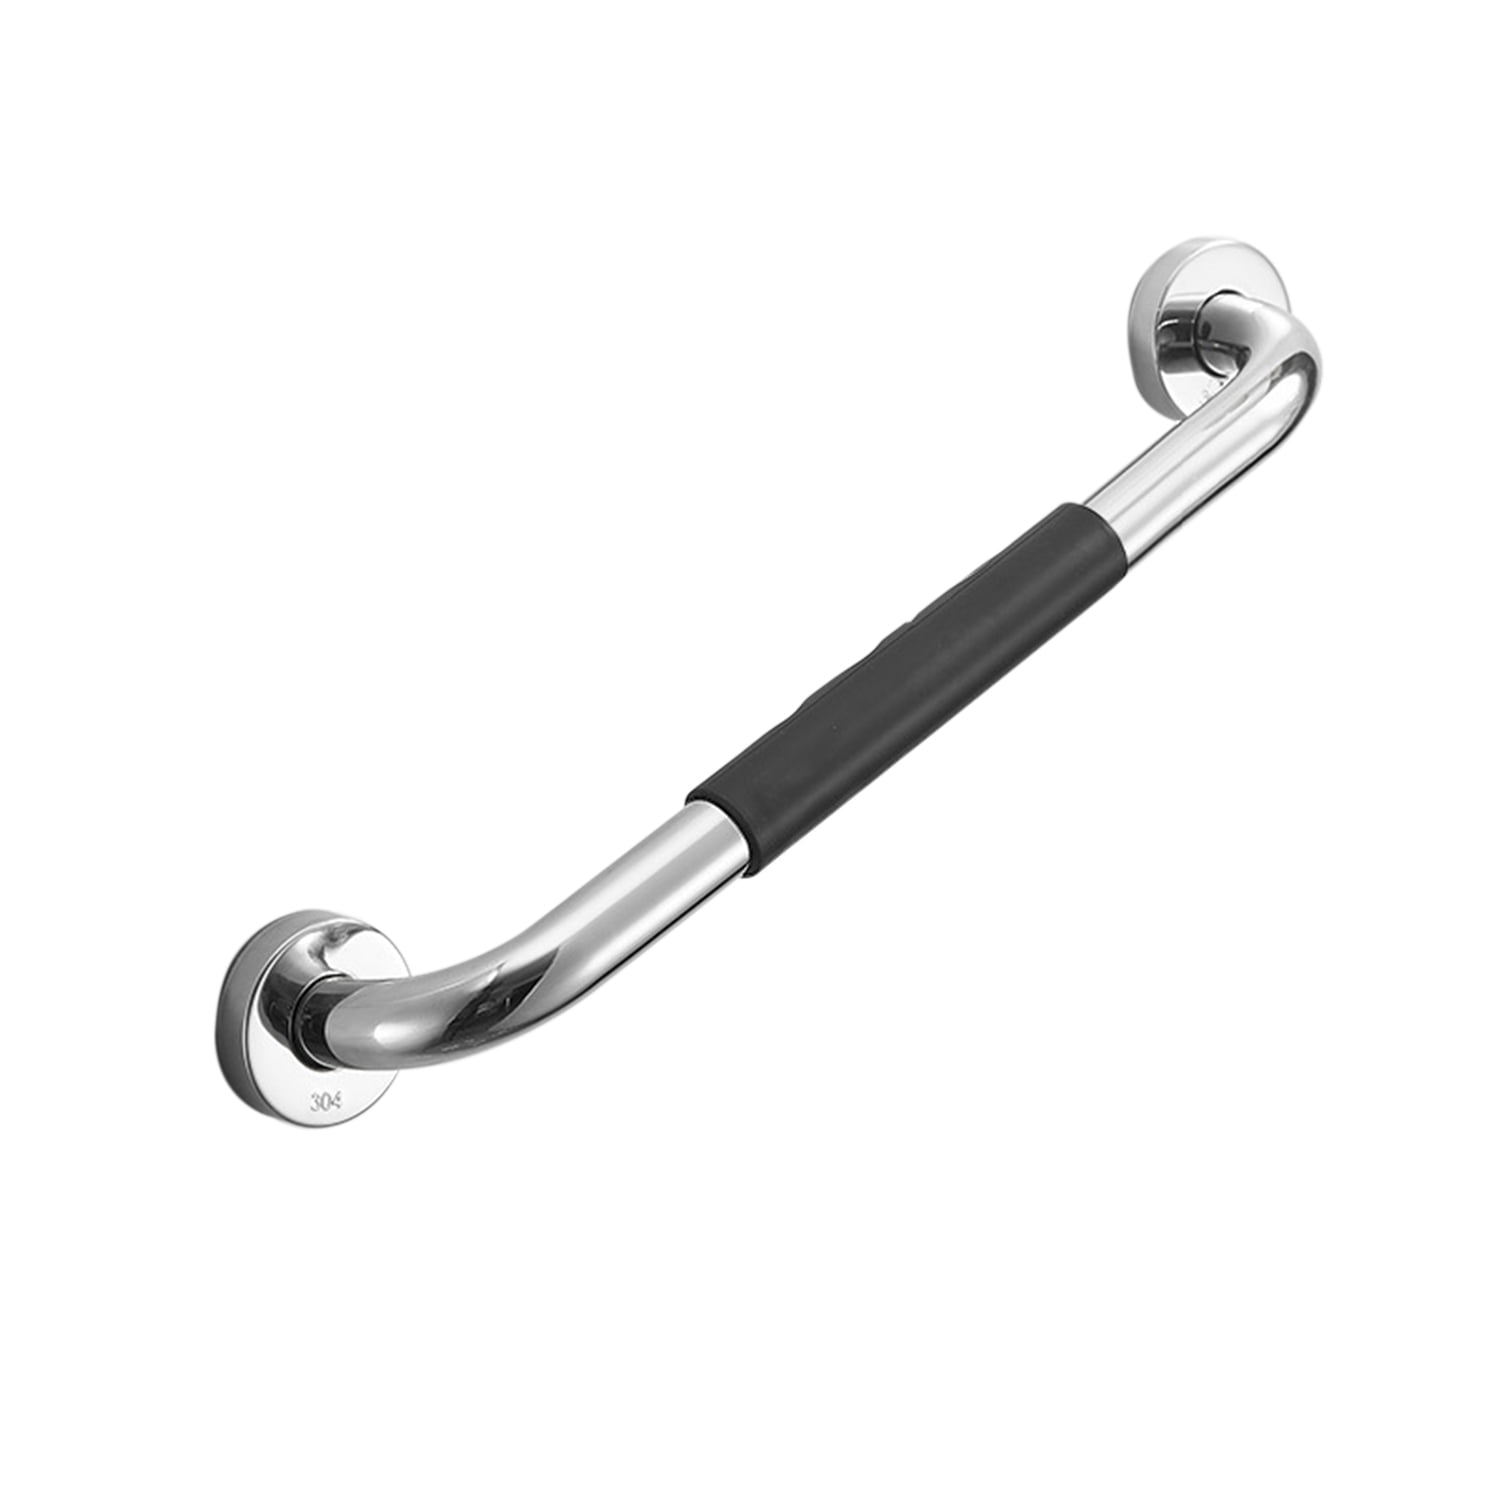 Details about  / Stainless Steel Bathroom Toilet Handrail Grab Bar Shower Safety Support Handle